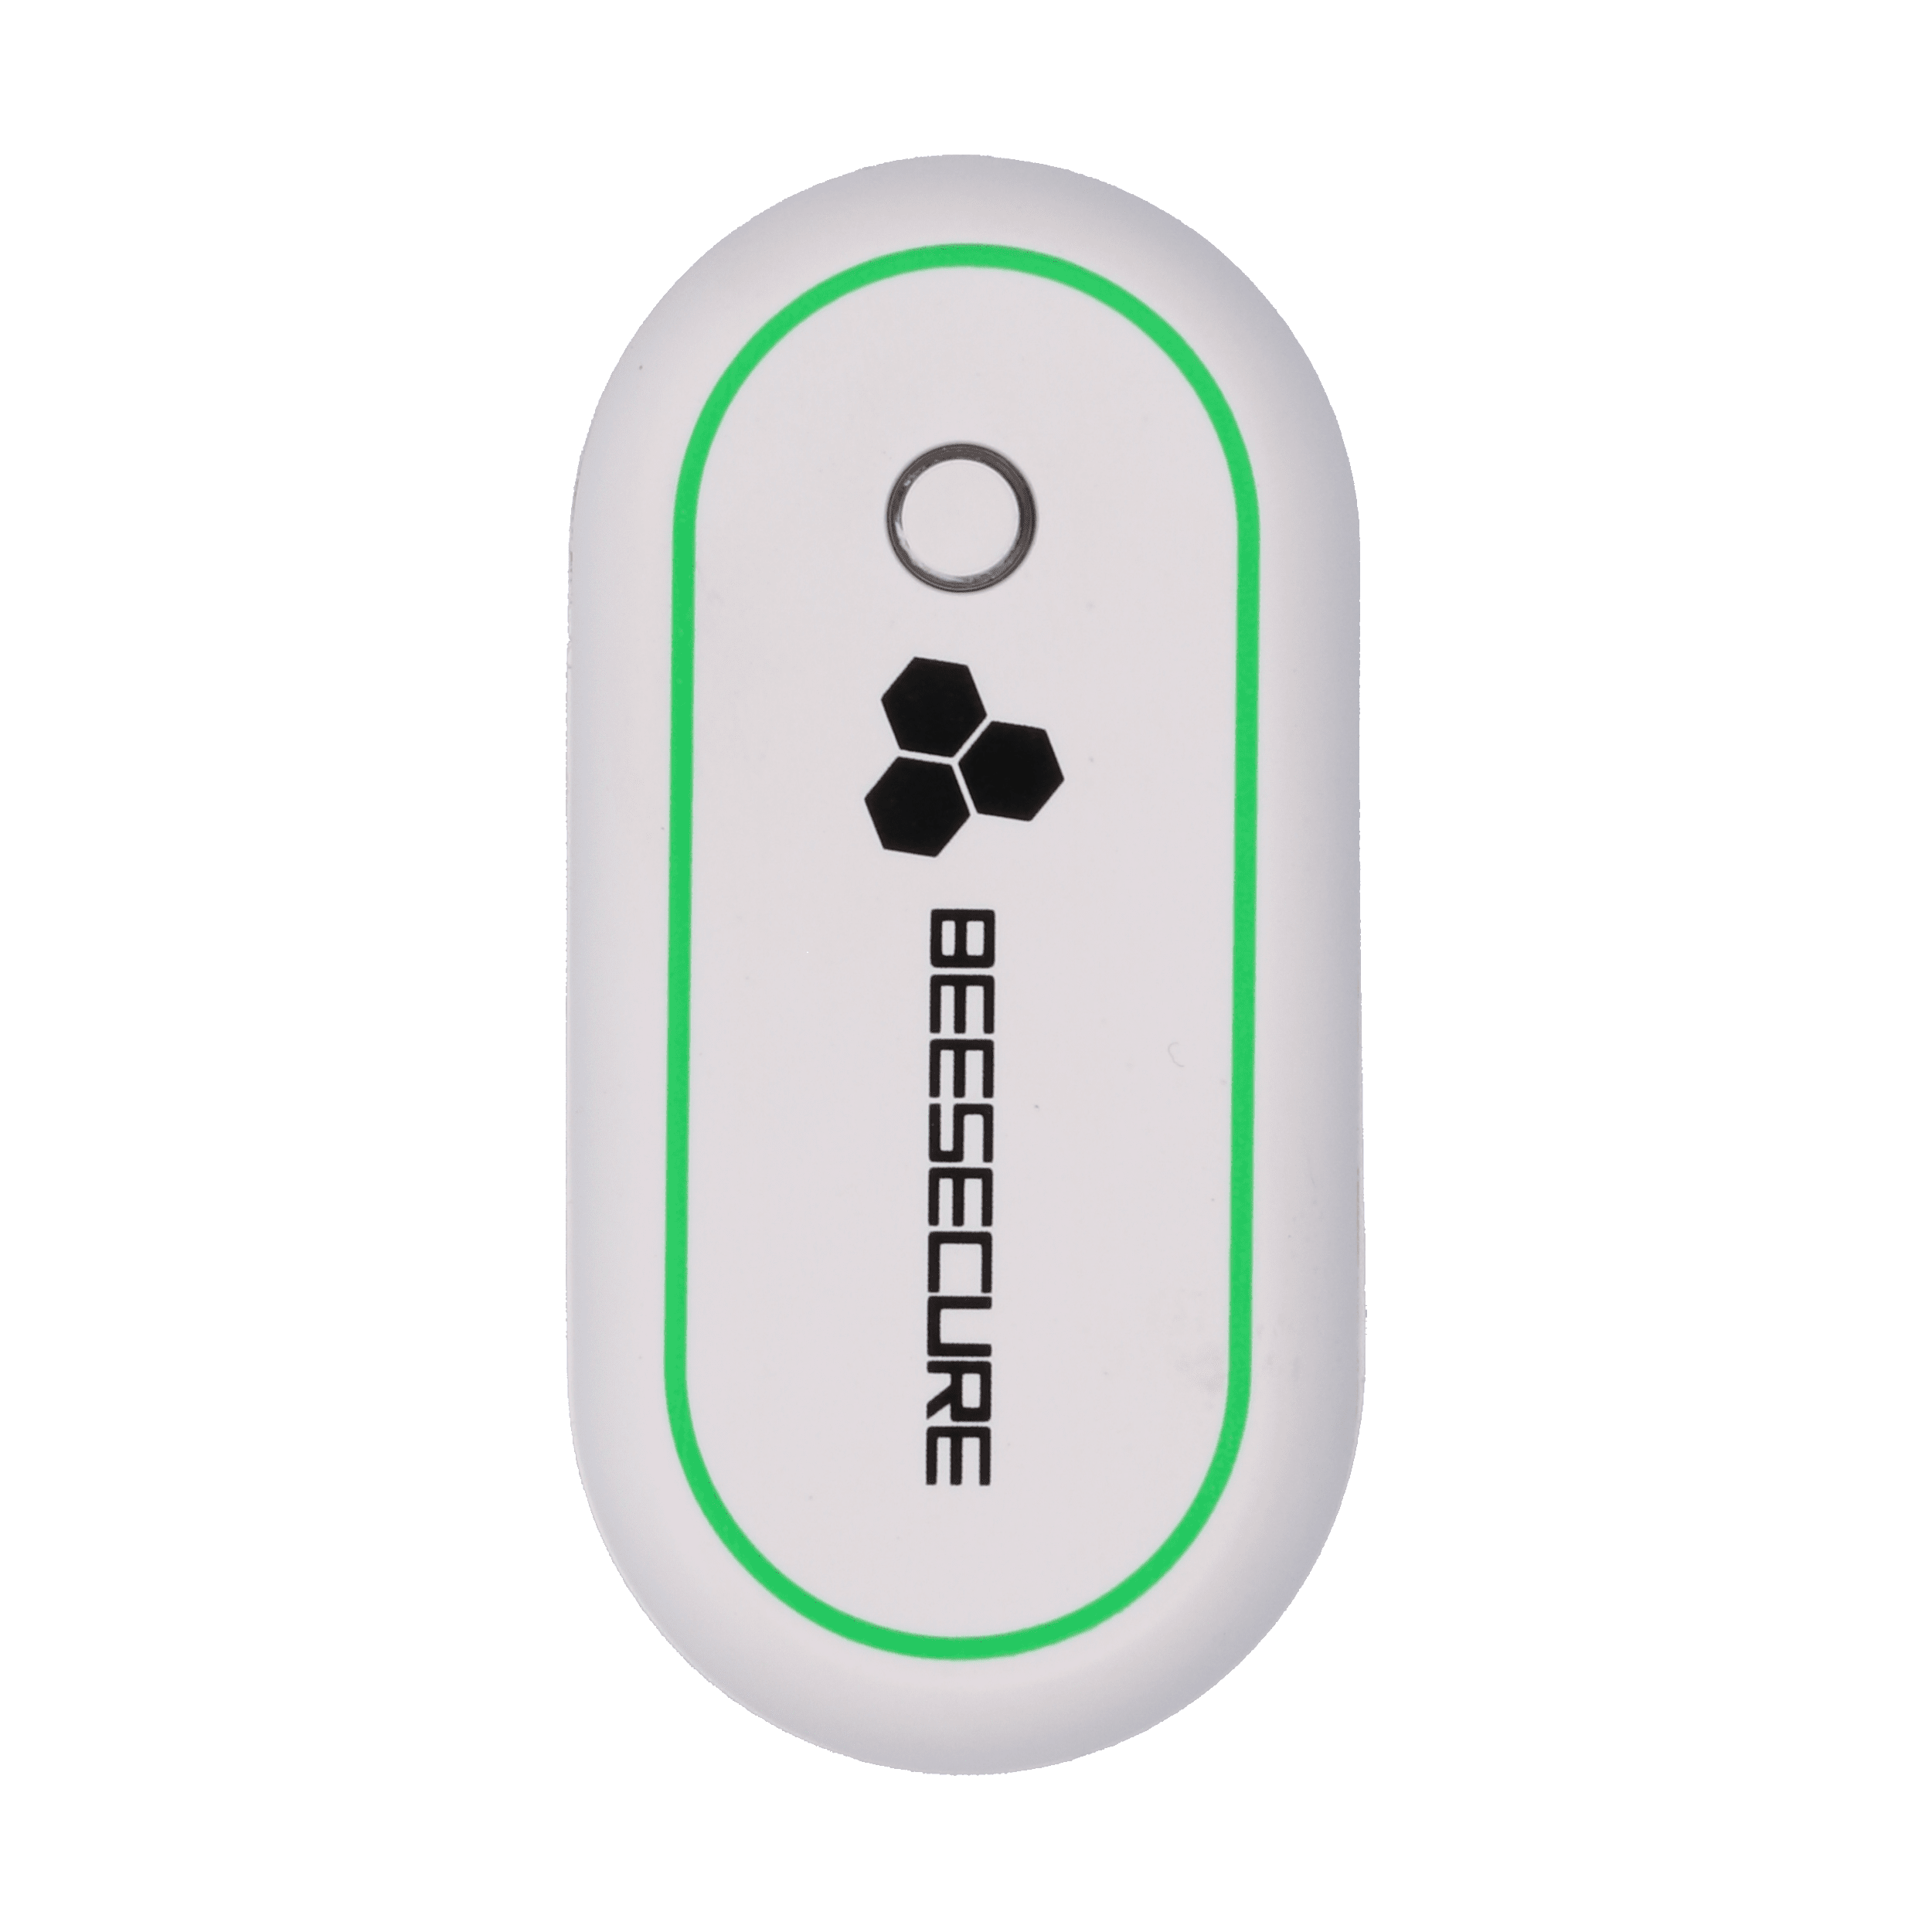 BeeSecure object movement sensor